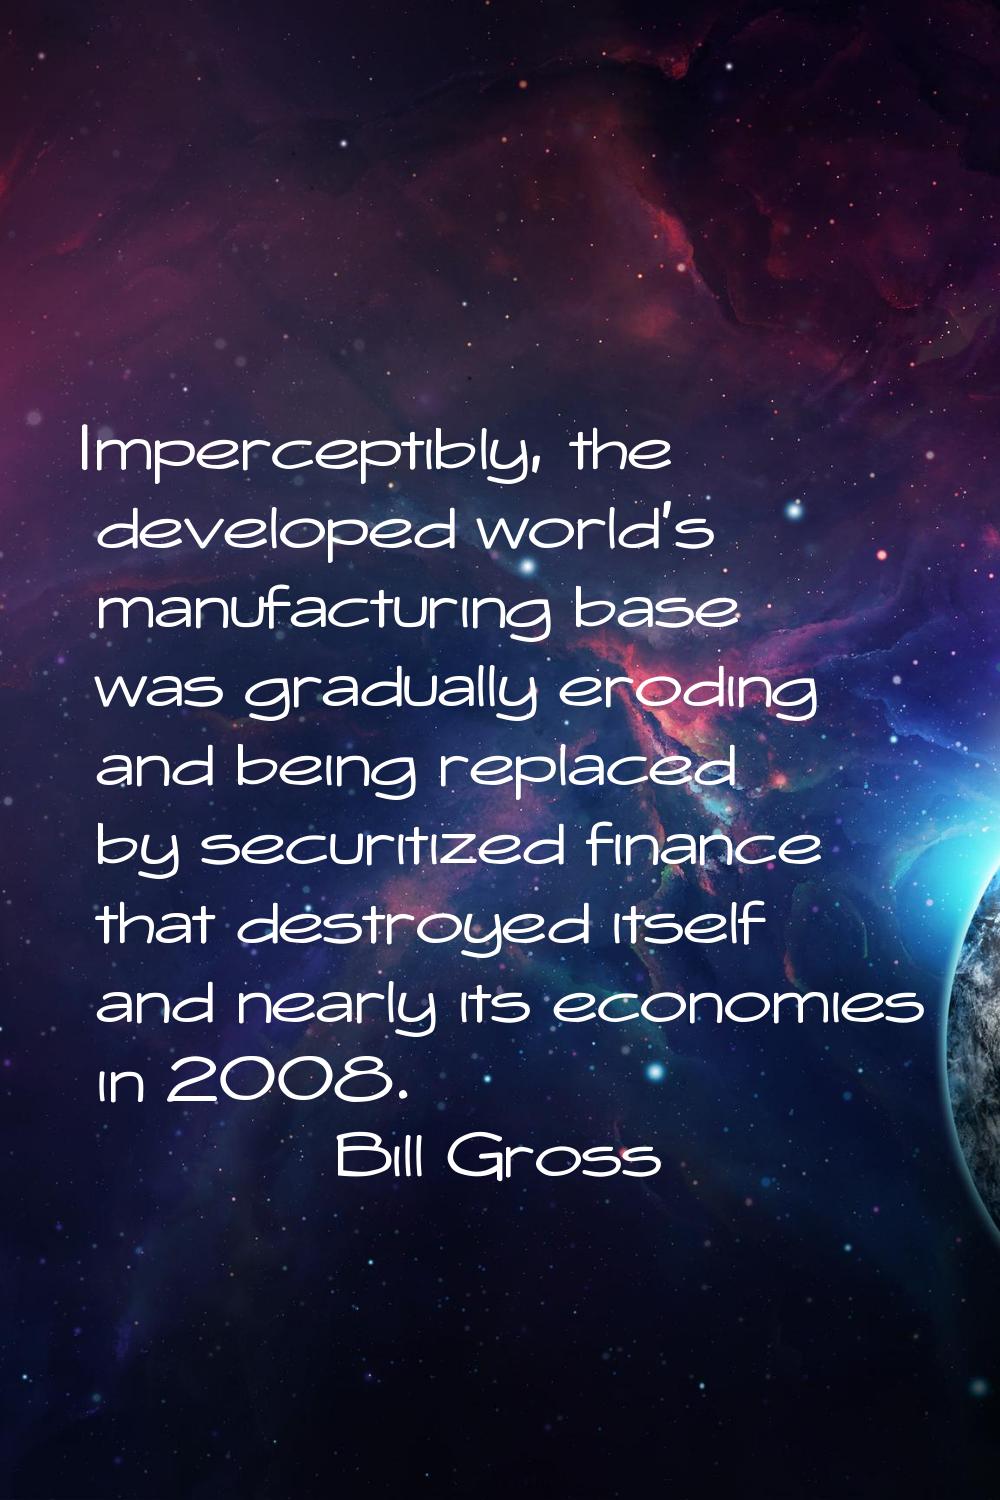 Imperceptibly, the developed world's manufacturing base was gradually eroding and being replaced by